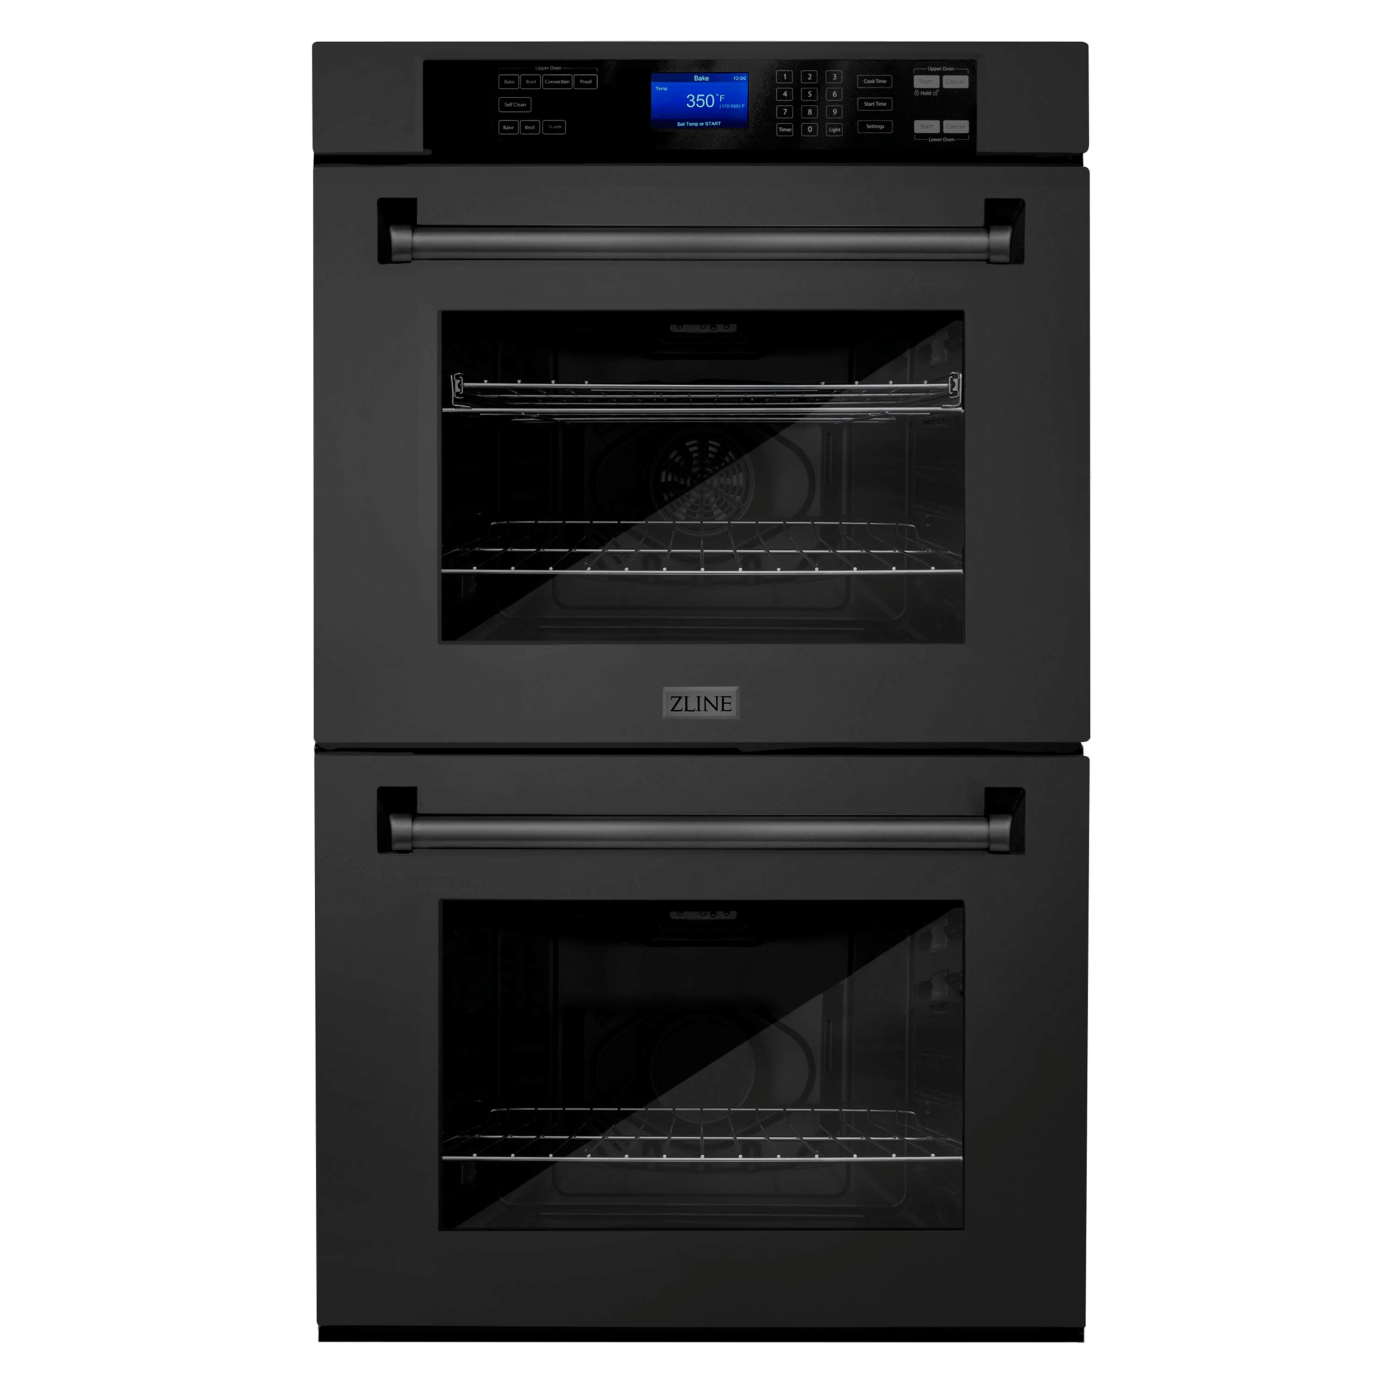 ZLINE Double Wall Oven in Black Stainless Steel - white background